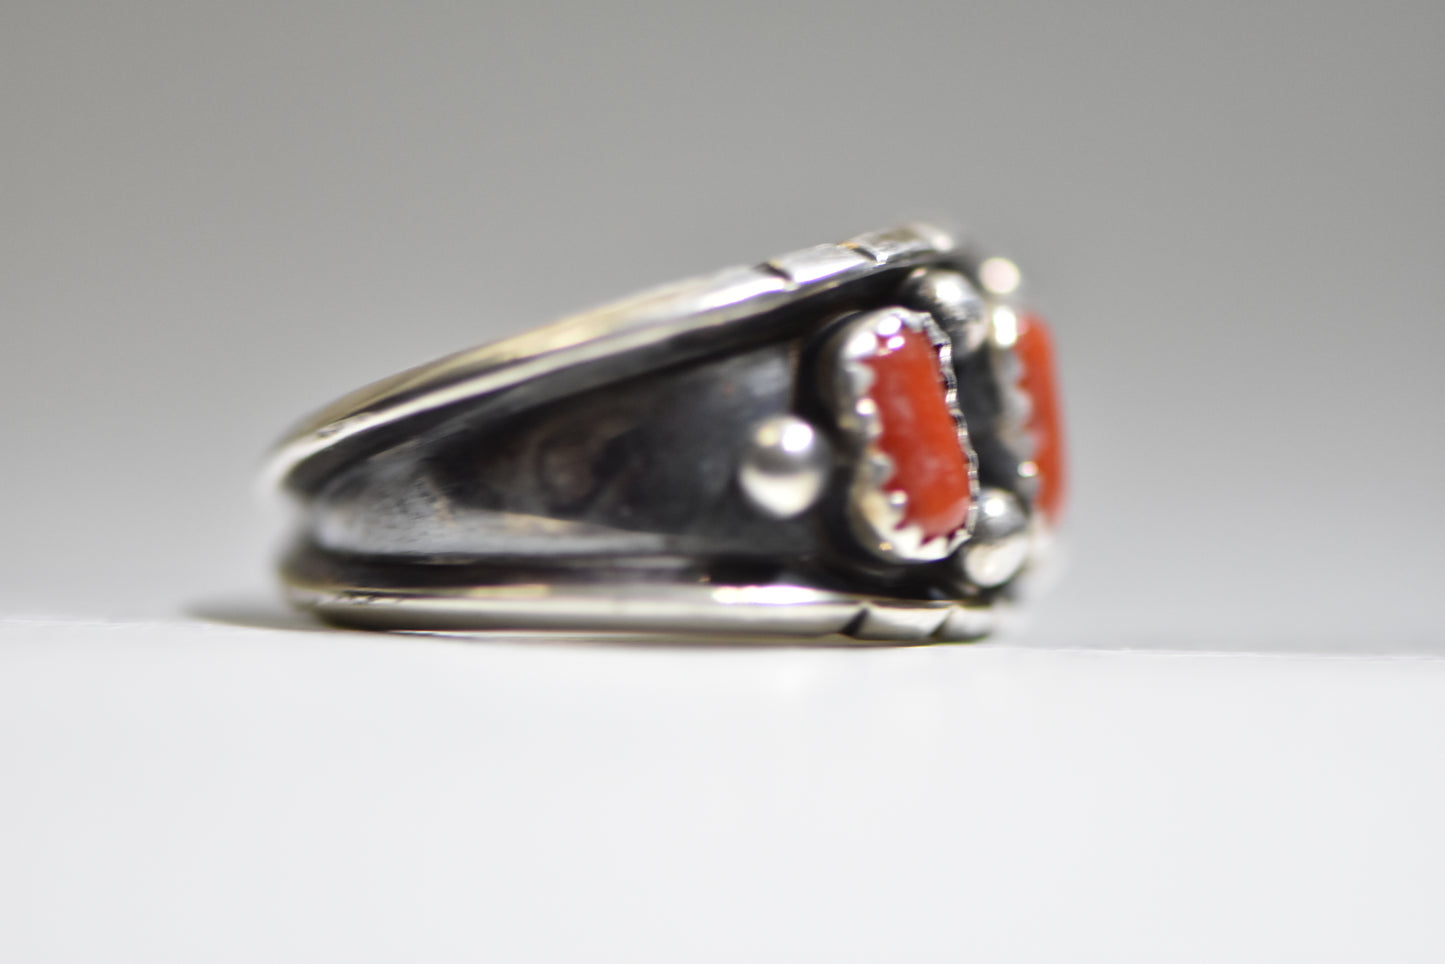 Navajo ring coral band southwest tribal sterling silver women